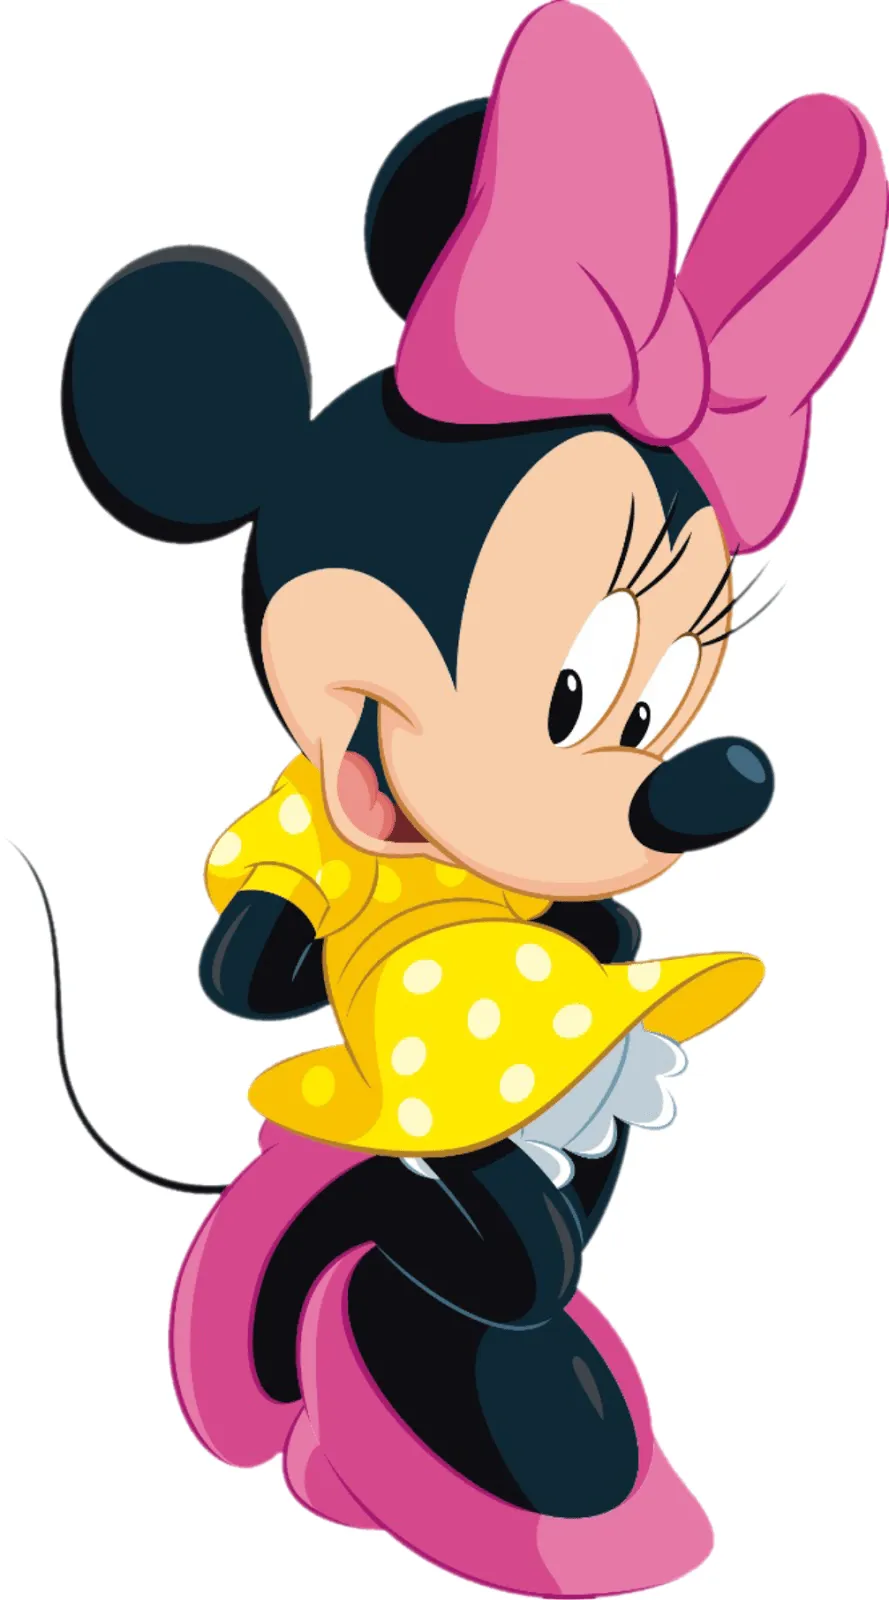 Disney inspired Minnie Mouse on Pinterest